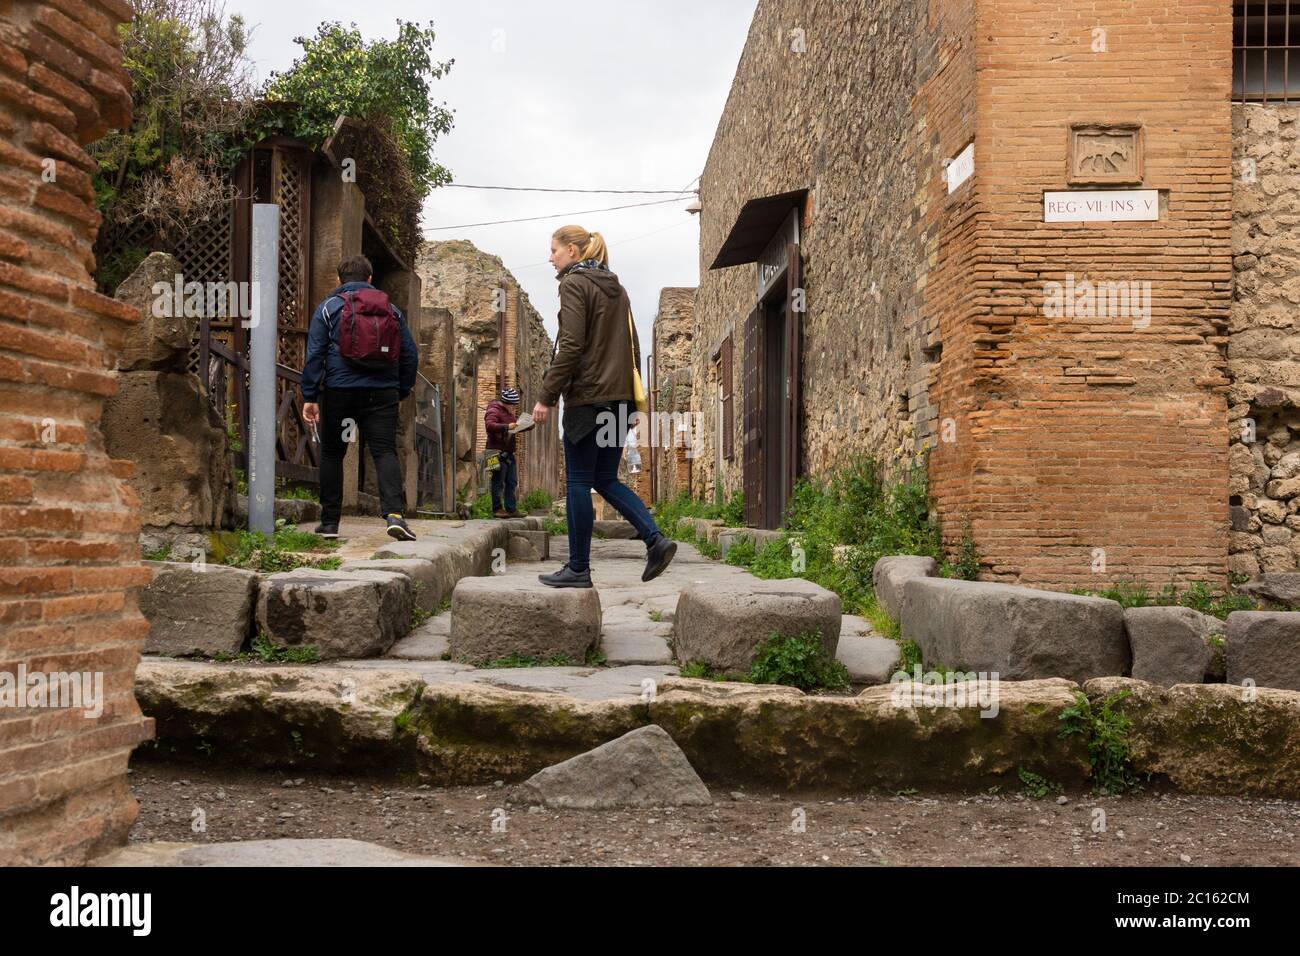 A visitor to the ancient city of Pompeii walks over stepping stones used by pedestrians to cross streets without stepping down into them. Italy Stock Photo